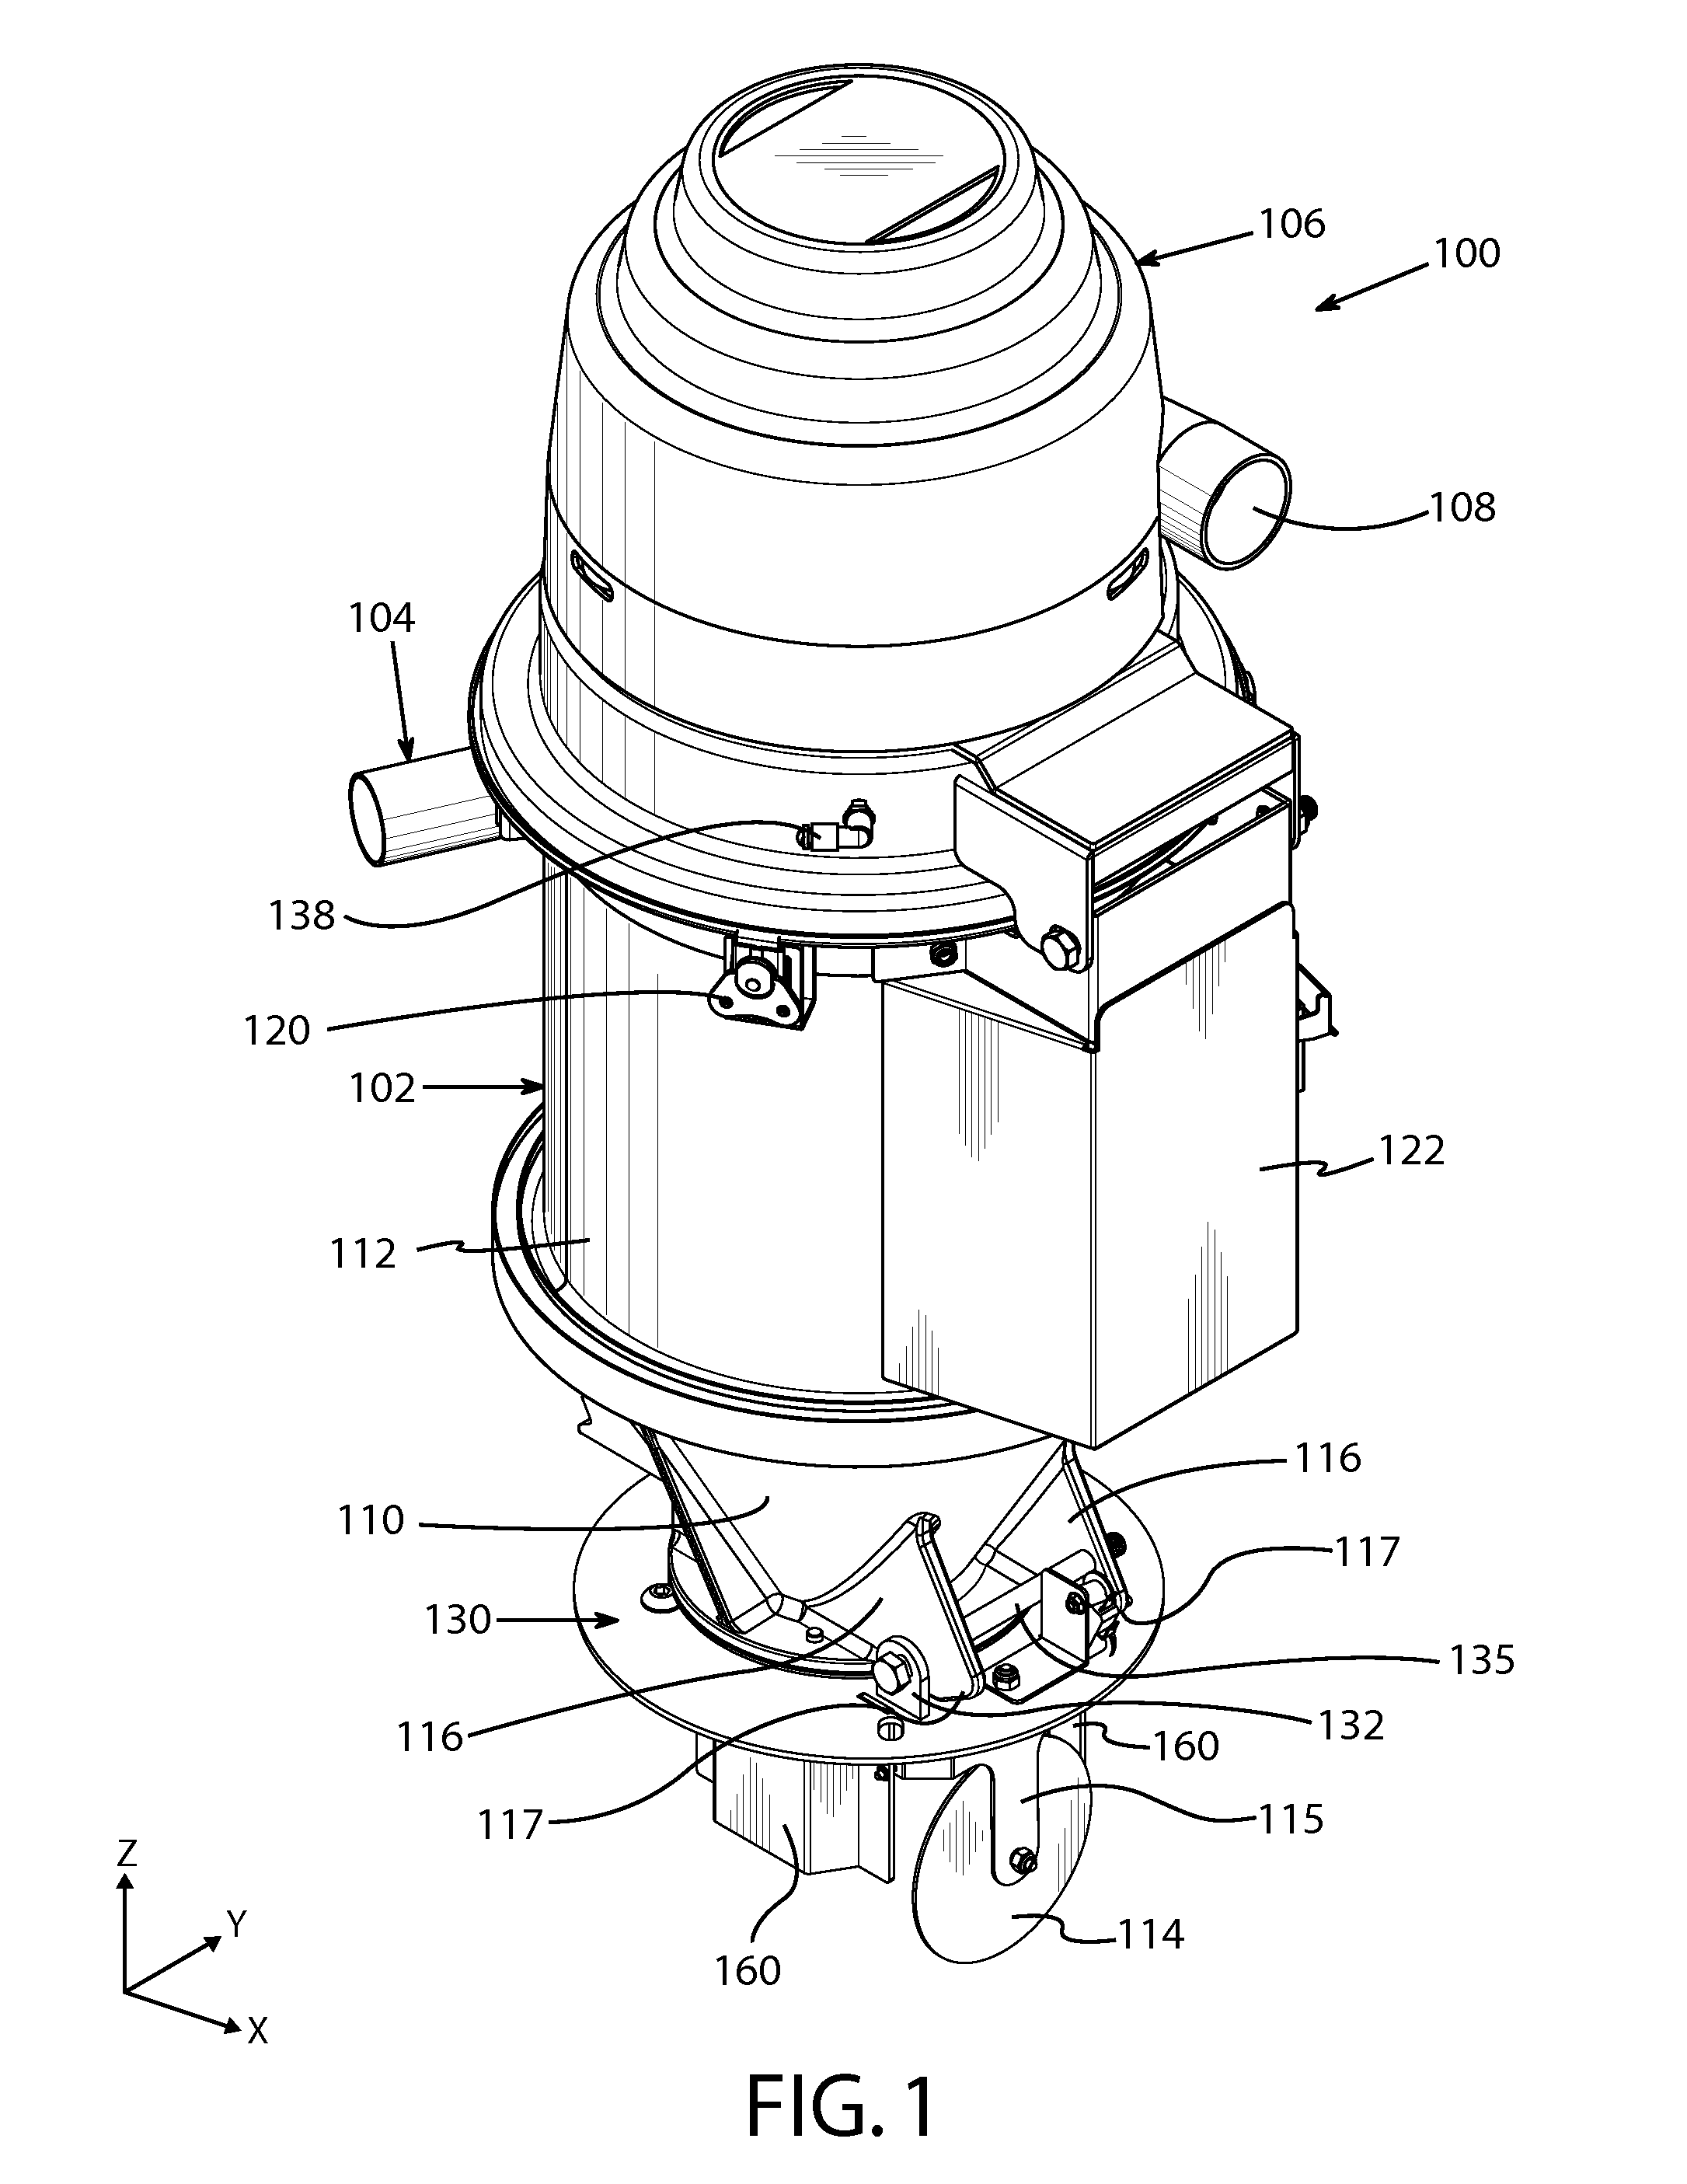 Tiltable vacuum loader and receiver with blow-back